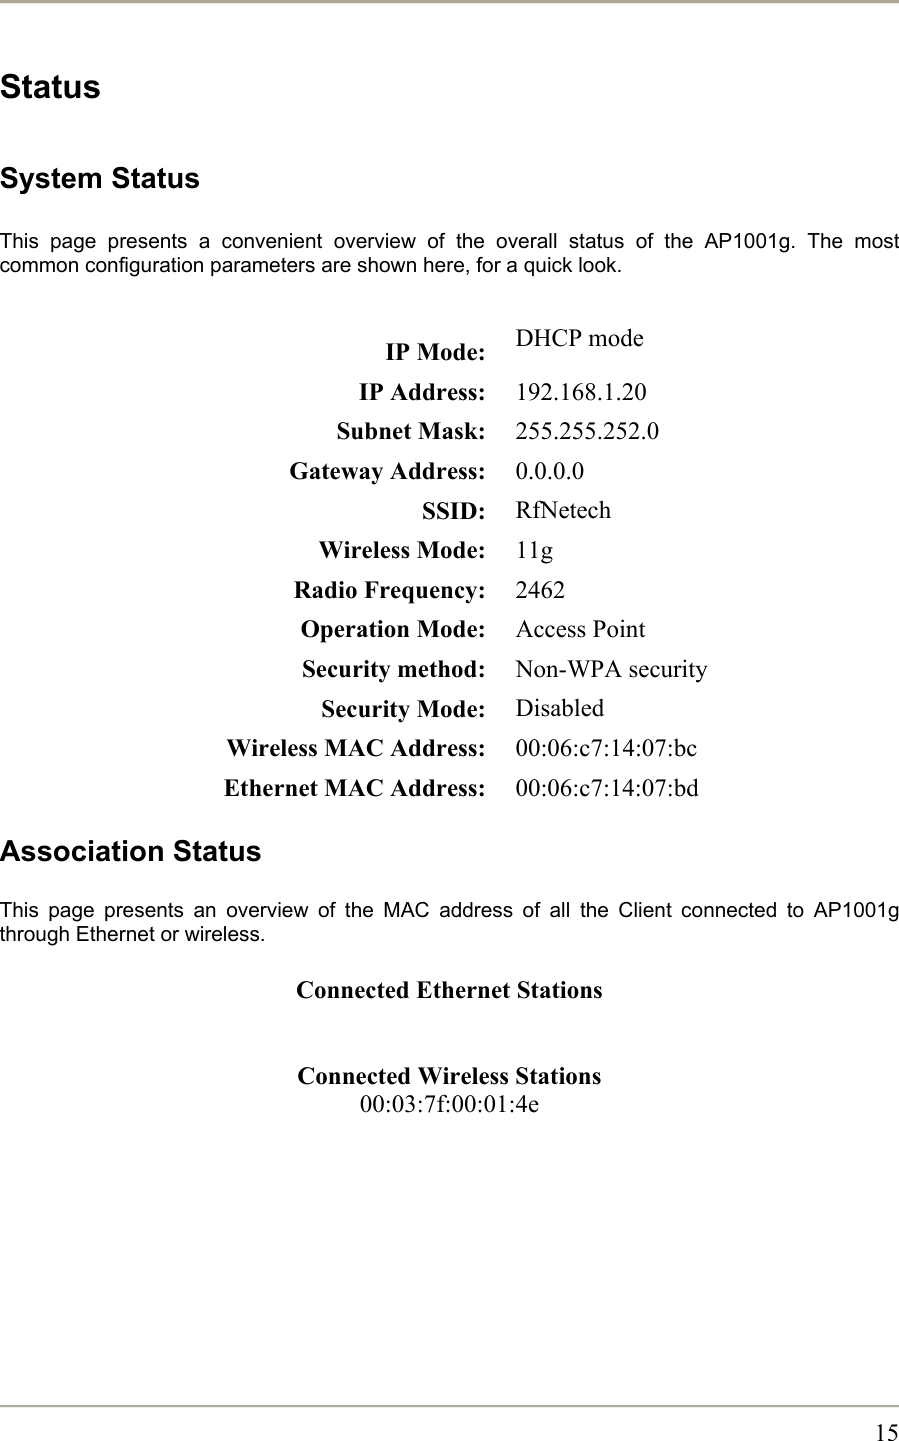       15Status  System Status  This page presents a convenient overview of the overall status of the AP1001g. The most common configuration parameters are shown here, for a quick look.  IP Mode:    DHCP mode  IP Address:    192.168.1.20 Subnet Mask:    255.255.252.0  Gateway Address:    0.0.0.0  SSID:    RfNetech  Wireless Mode:    11g  Radio Frequency:    2462  Operation Mode:    Access Point  Security method:    Non-WPA security  Security Mode:    Disabled  Wireless MAC Address:    00:06:c7:14:07:bc  Ethernet MAC Address:    00:06:c7:14:07:bd  Association Status  This page presents an overview of the MAC address of all the Client connected to AP1001g through Ethernet or wireless.  Connected Ethernet Stations   Connected Wireless Stations 00:03:7f:00:01:4e       